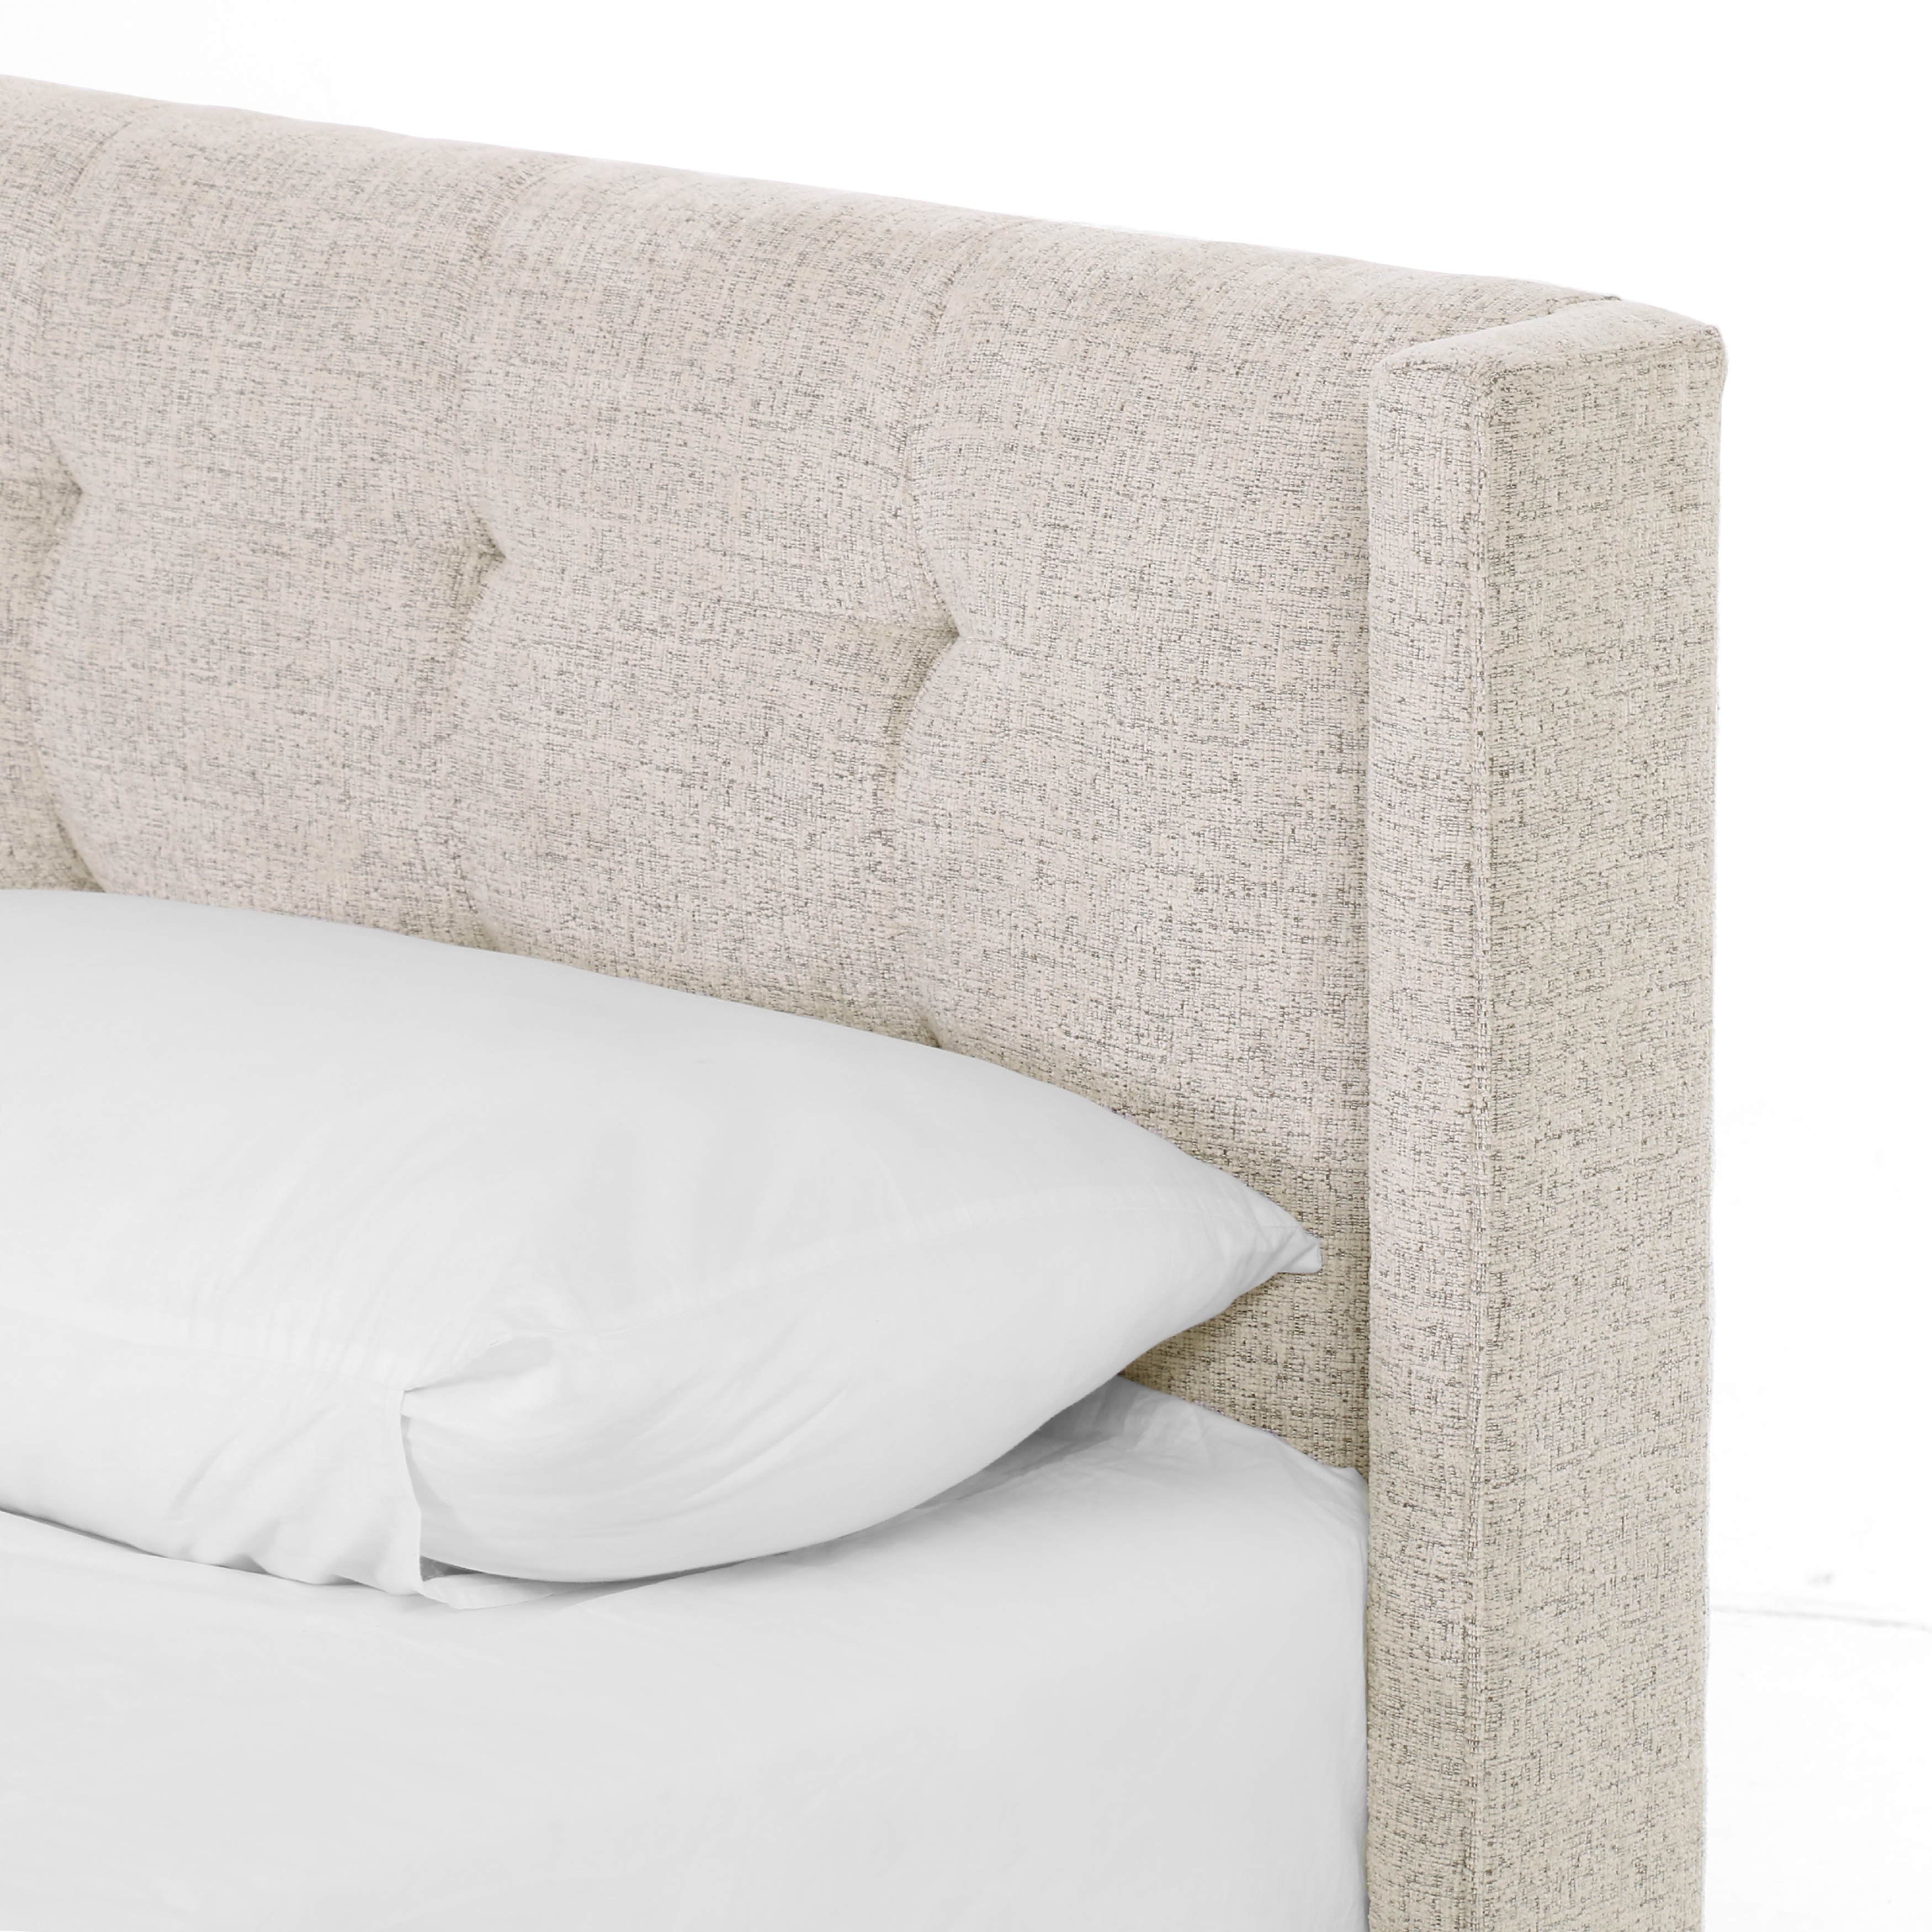 Newhall Bed-Plushtone Linen-Queen - Image 1